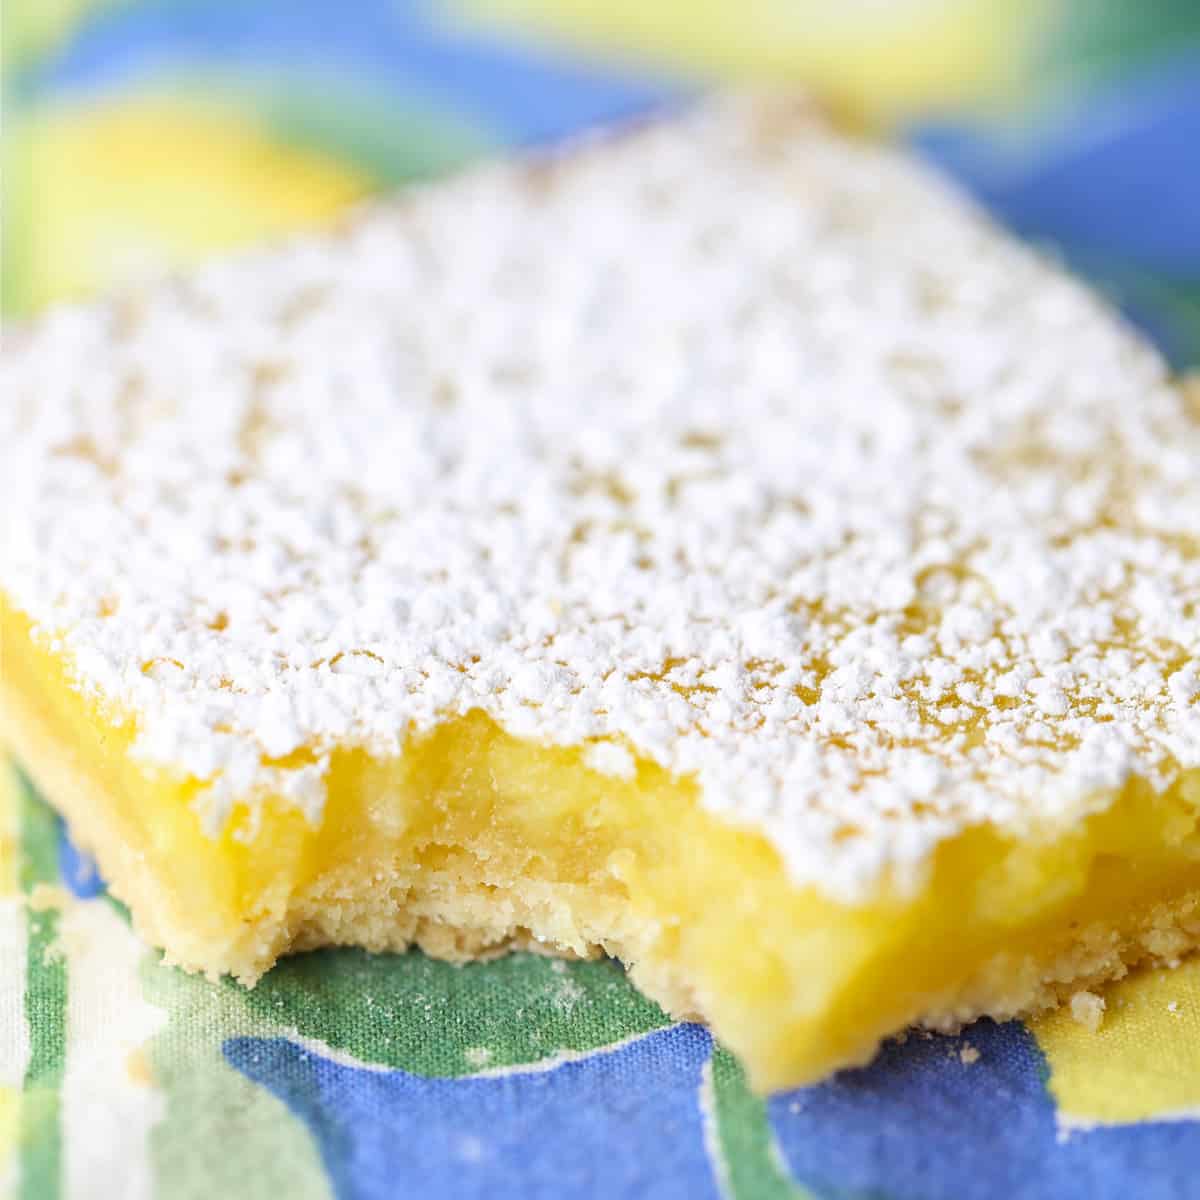 One lemon bar on napkin with a bite taken out